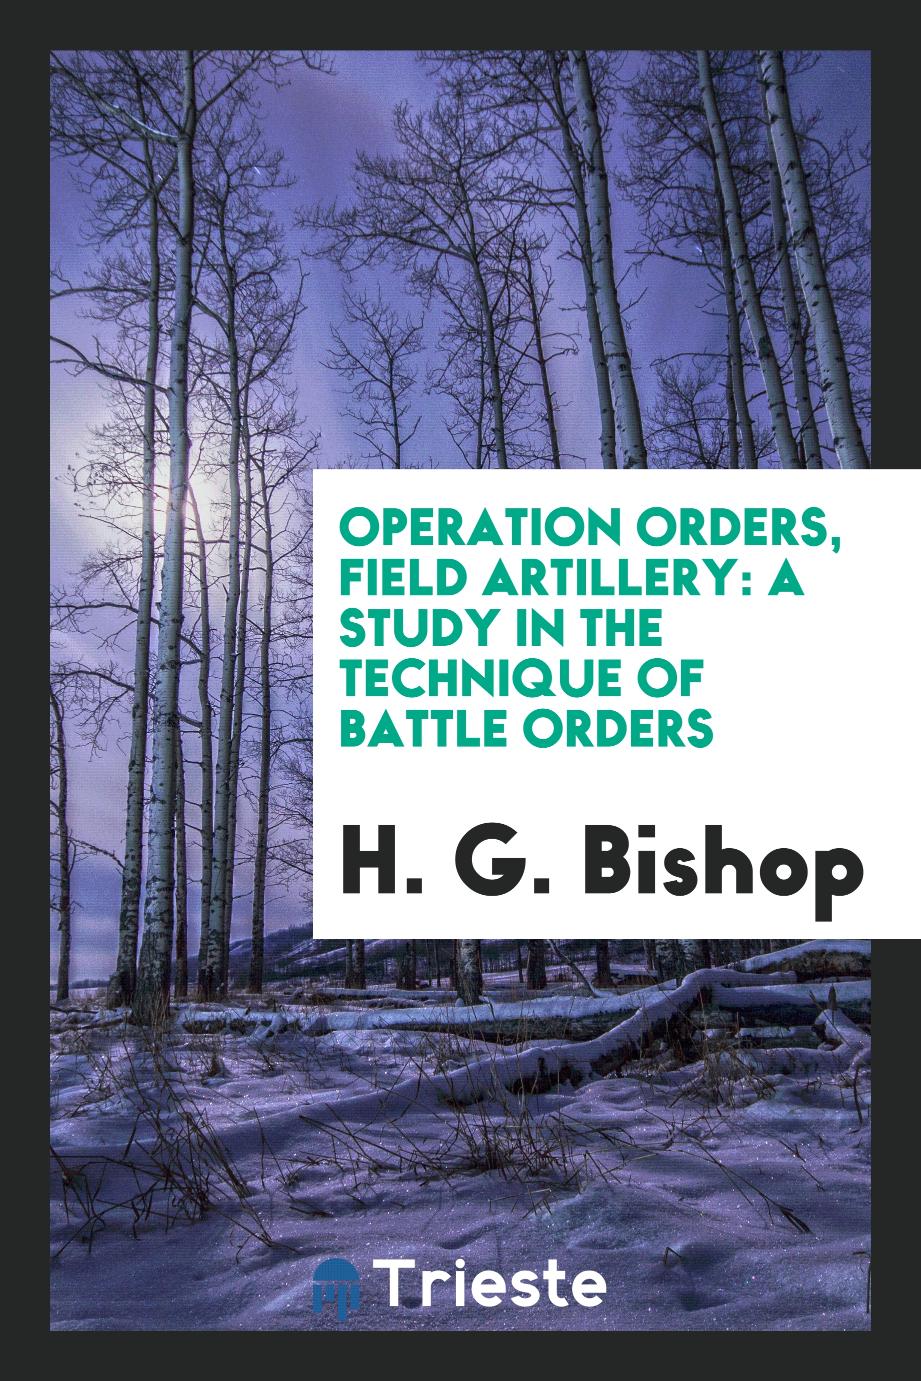 Operation Orders, Field Artillery: A Study in the Technique of Battle Orders